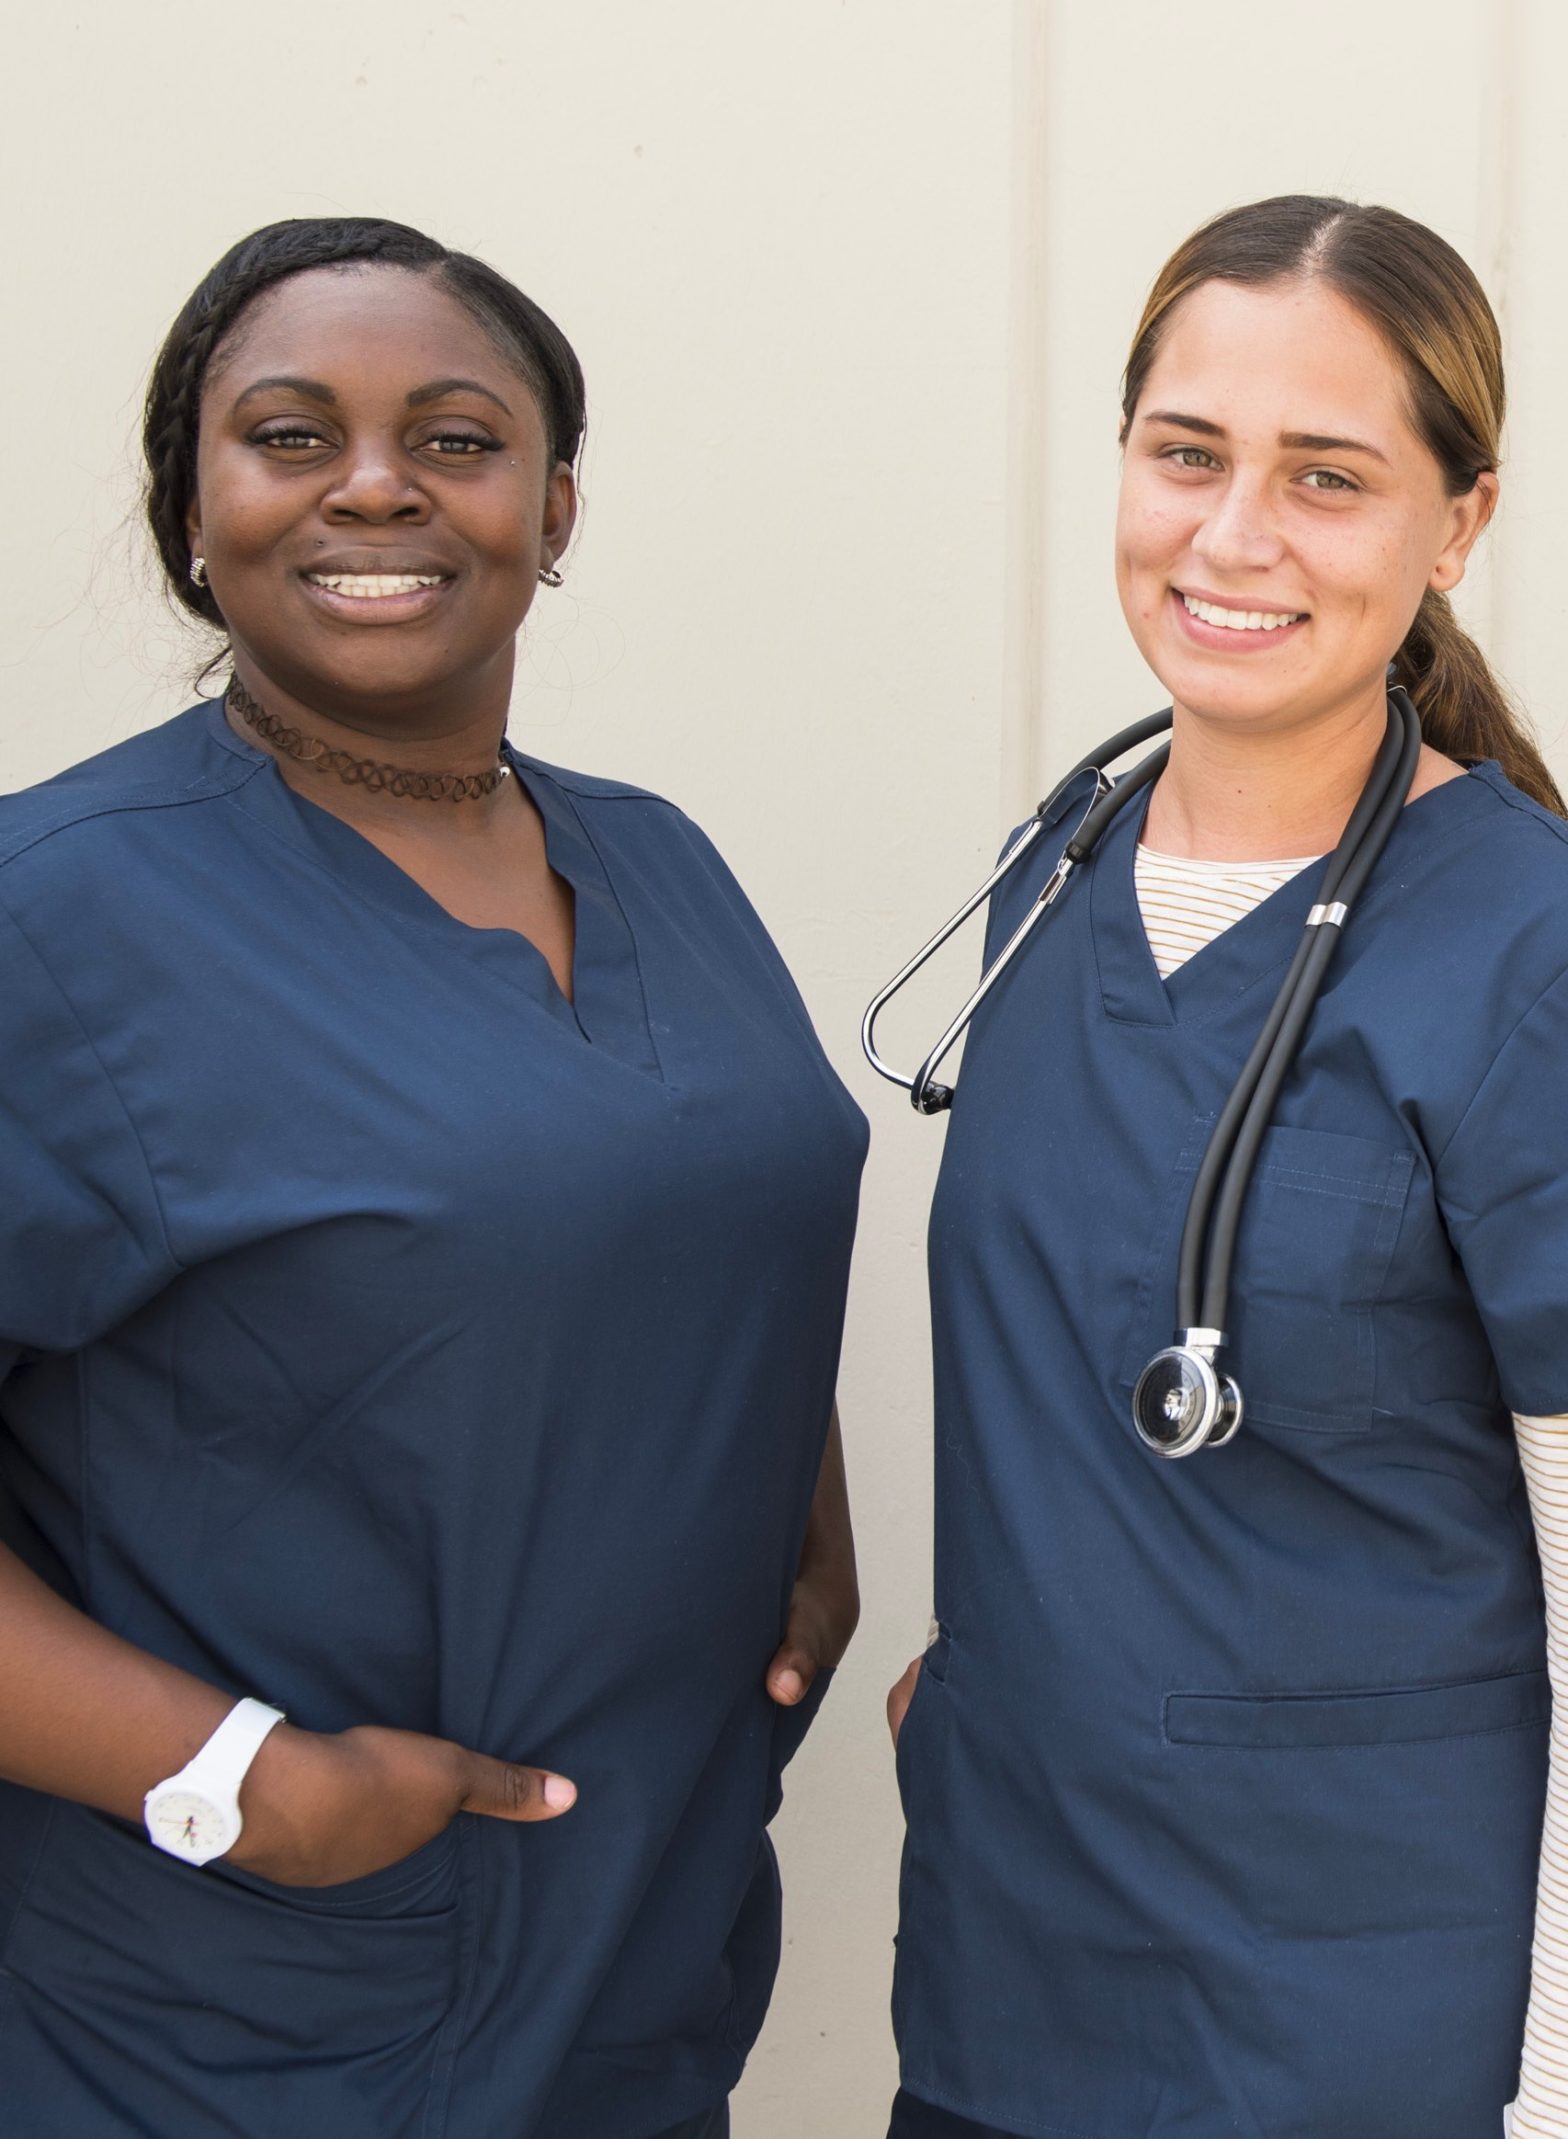 A young black woman and a young white woman, both in navy blue medical scrubs and smiling